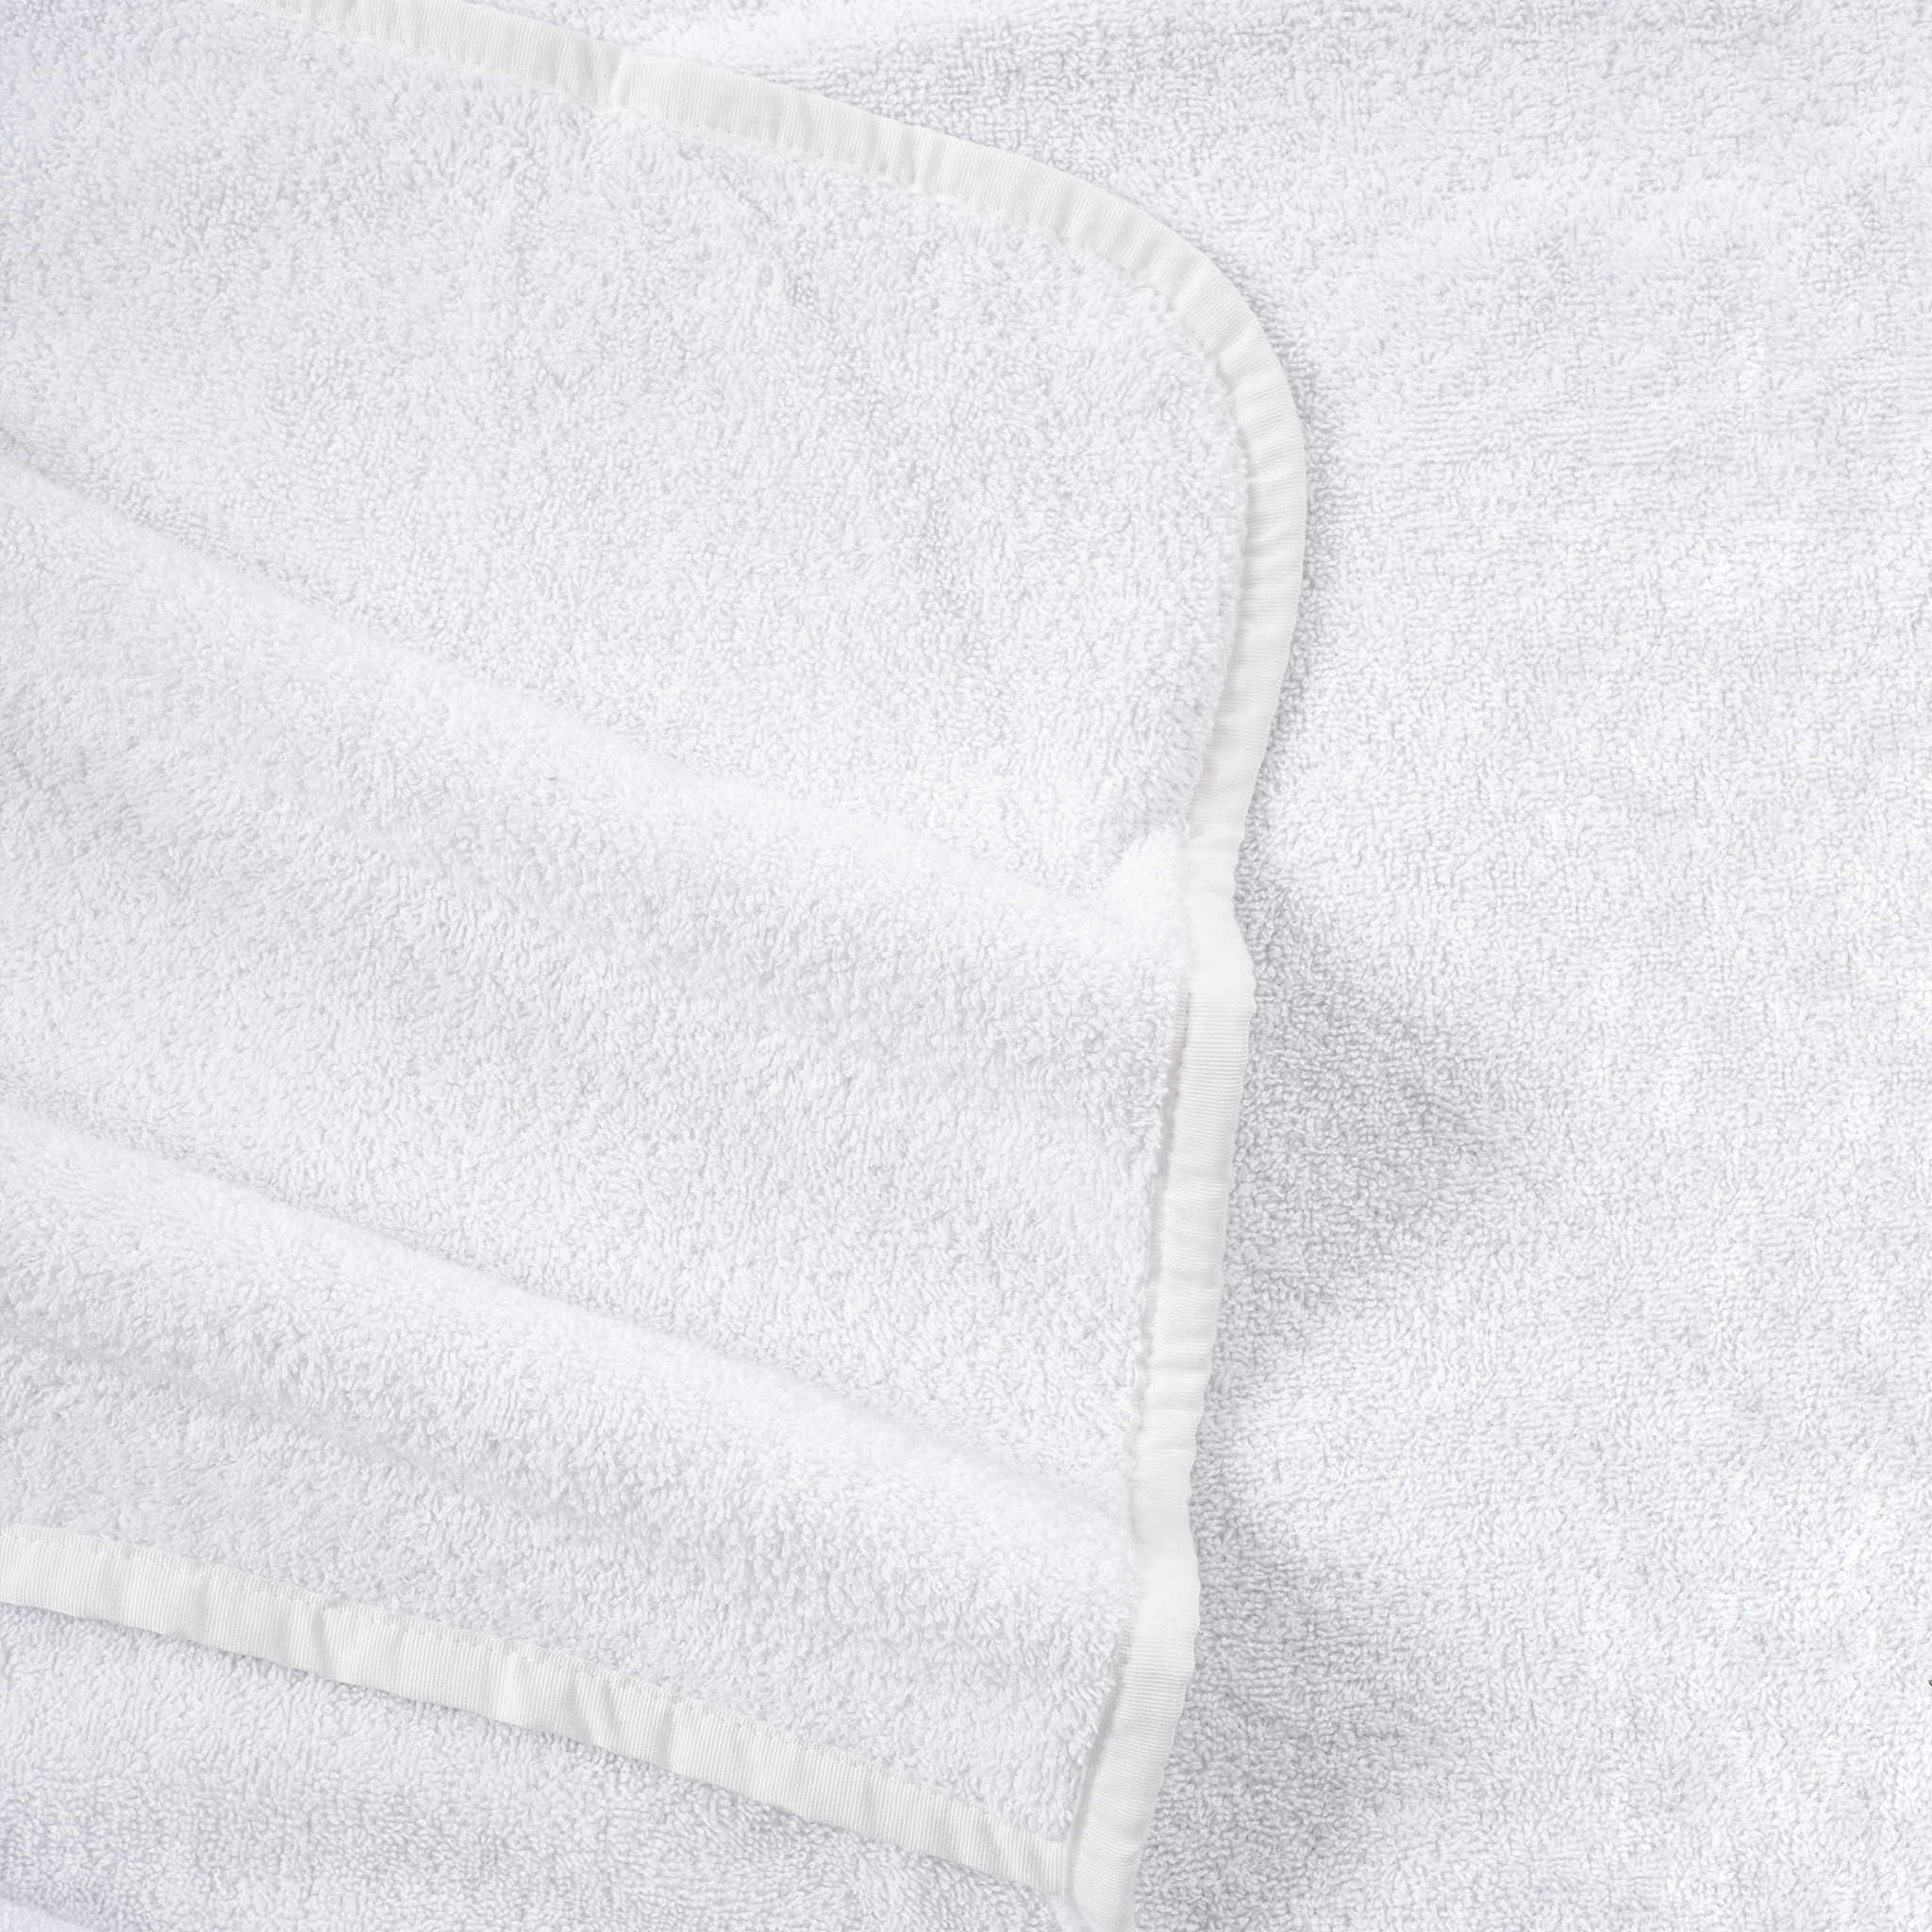 American Soft Linen - Chaise Lounge Covers Towels - White - 3